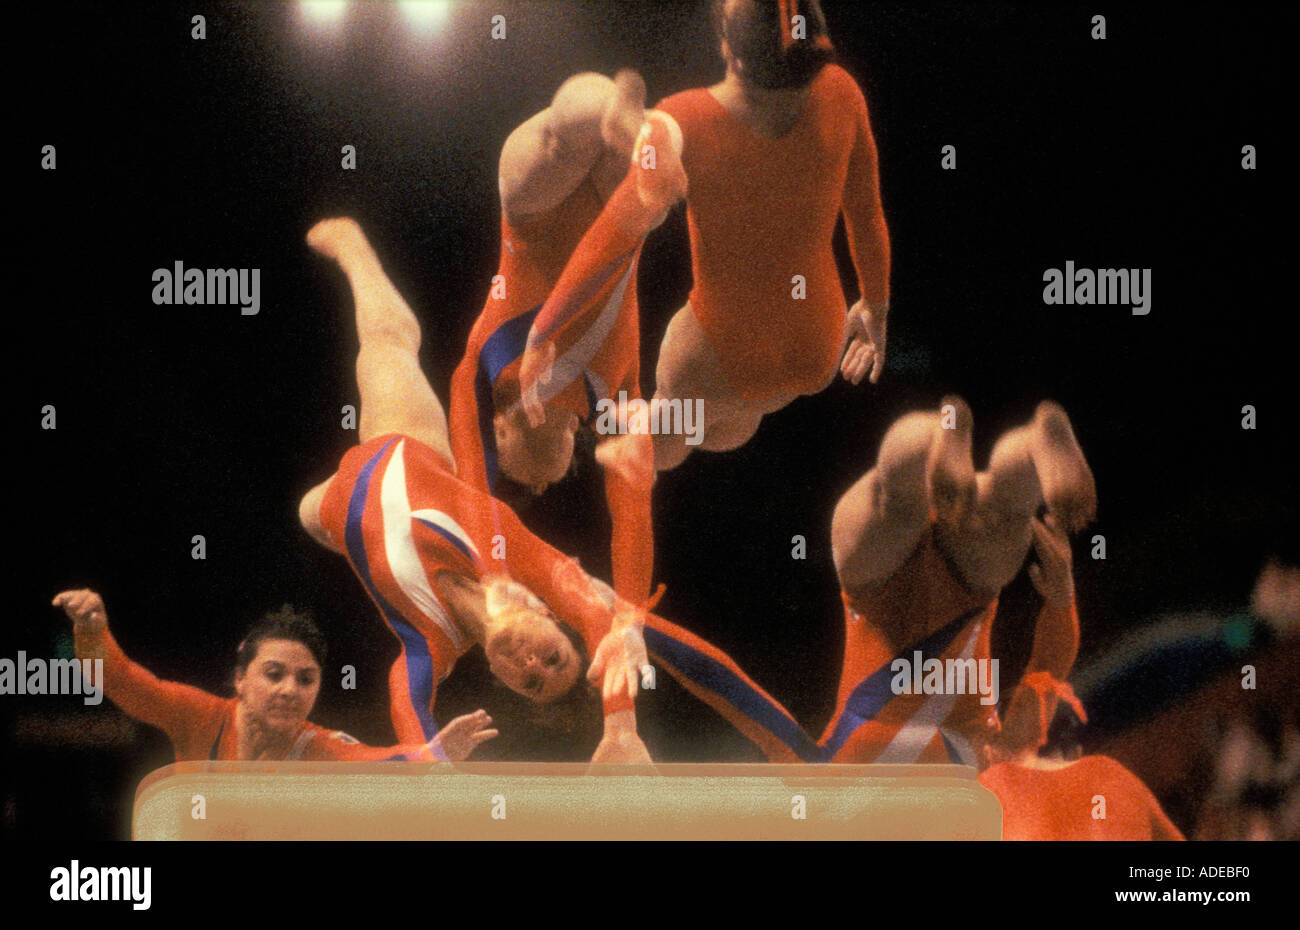 Strobe sequence of a Gymnast competing in a Vault Stock Photo